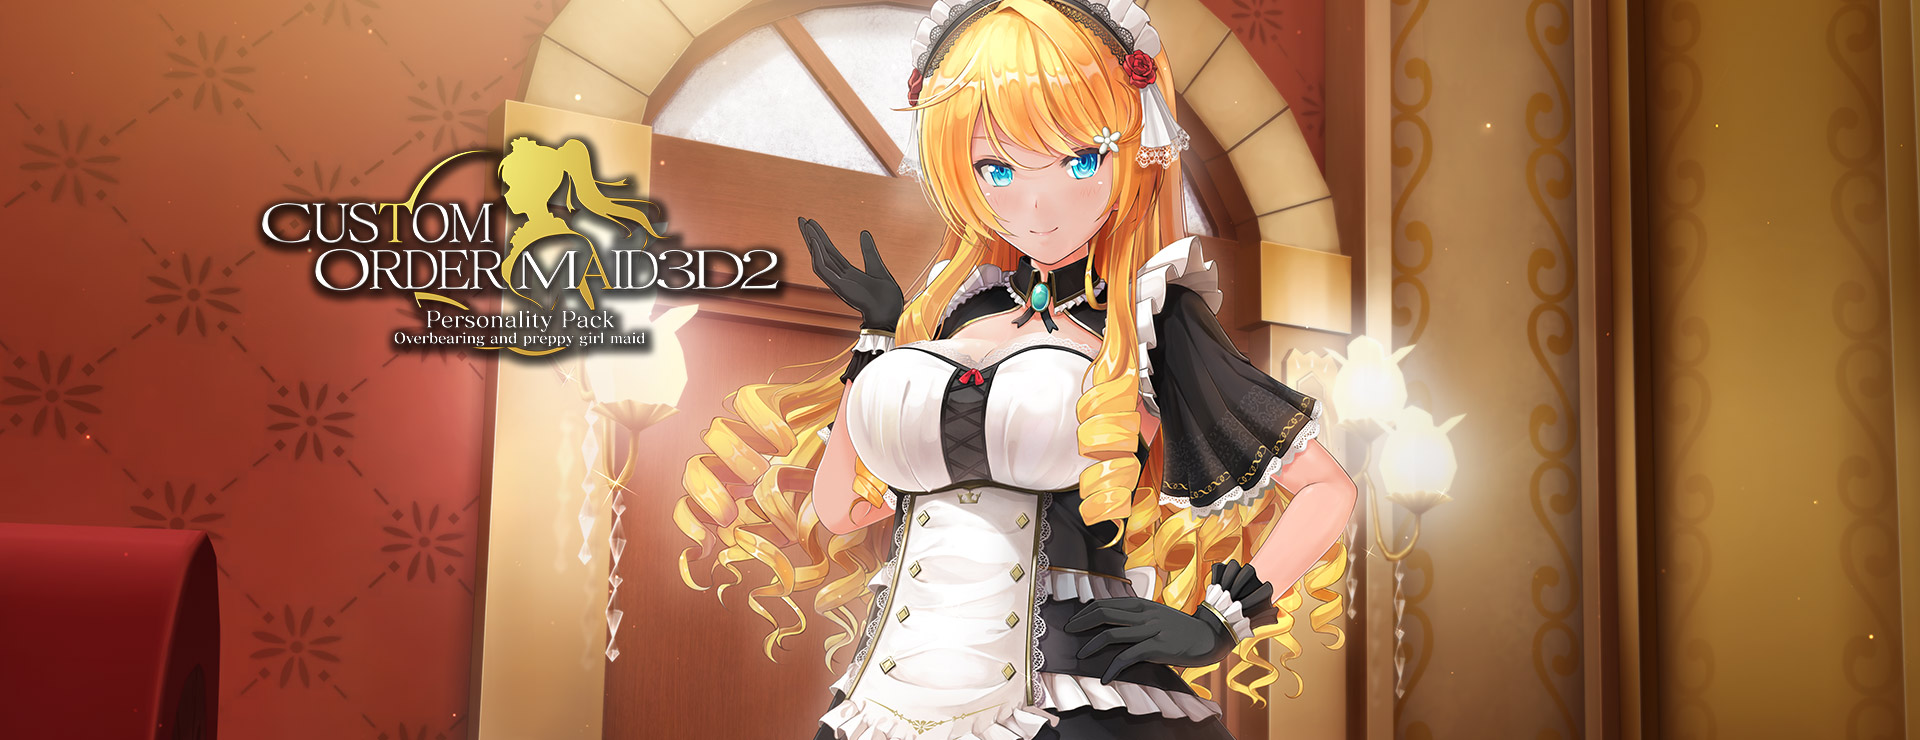 Custom Order Maid 3D 2: Overbearing and Preppy Girl Maid Complete Bundle - Simulation Game